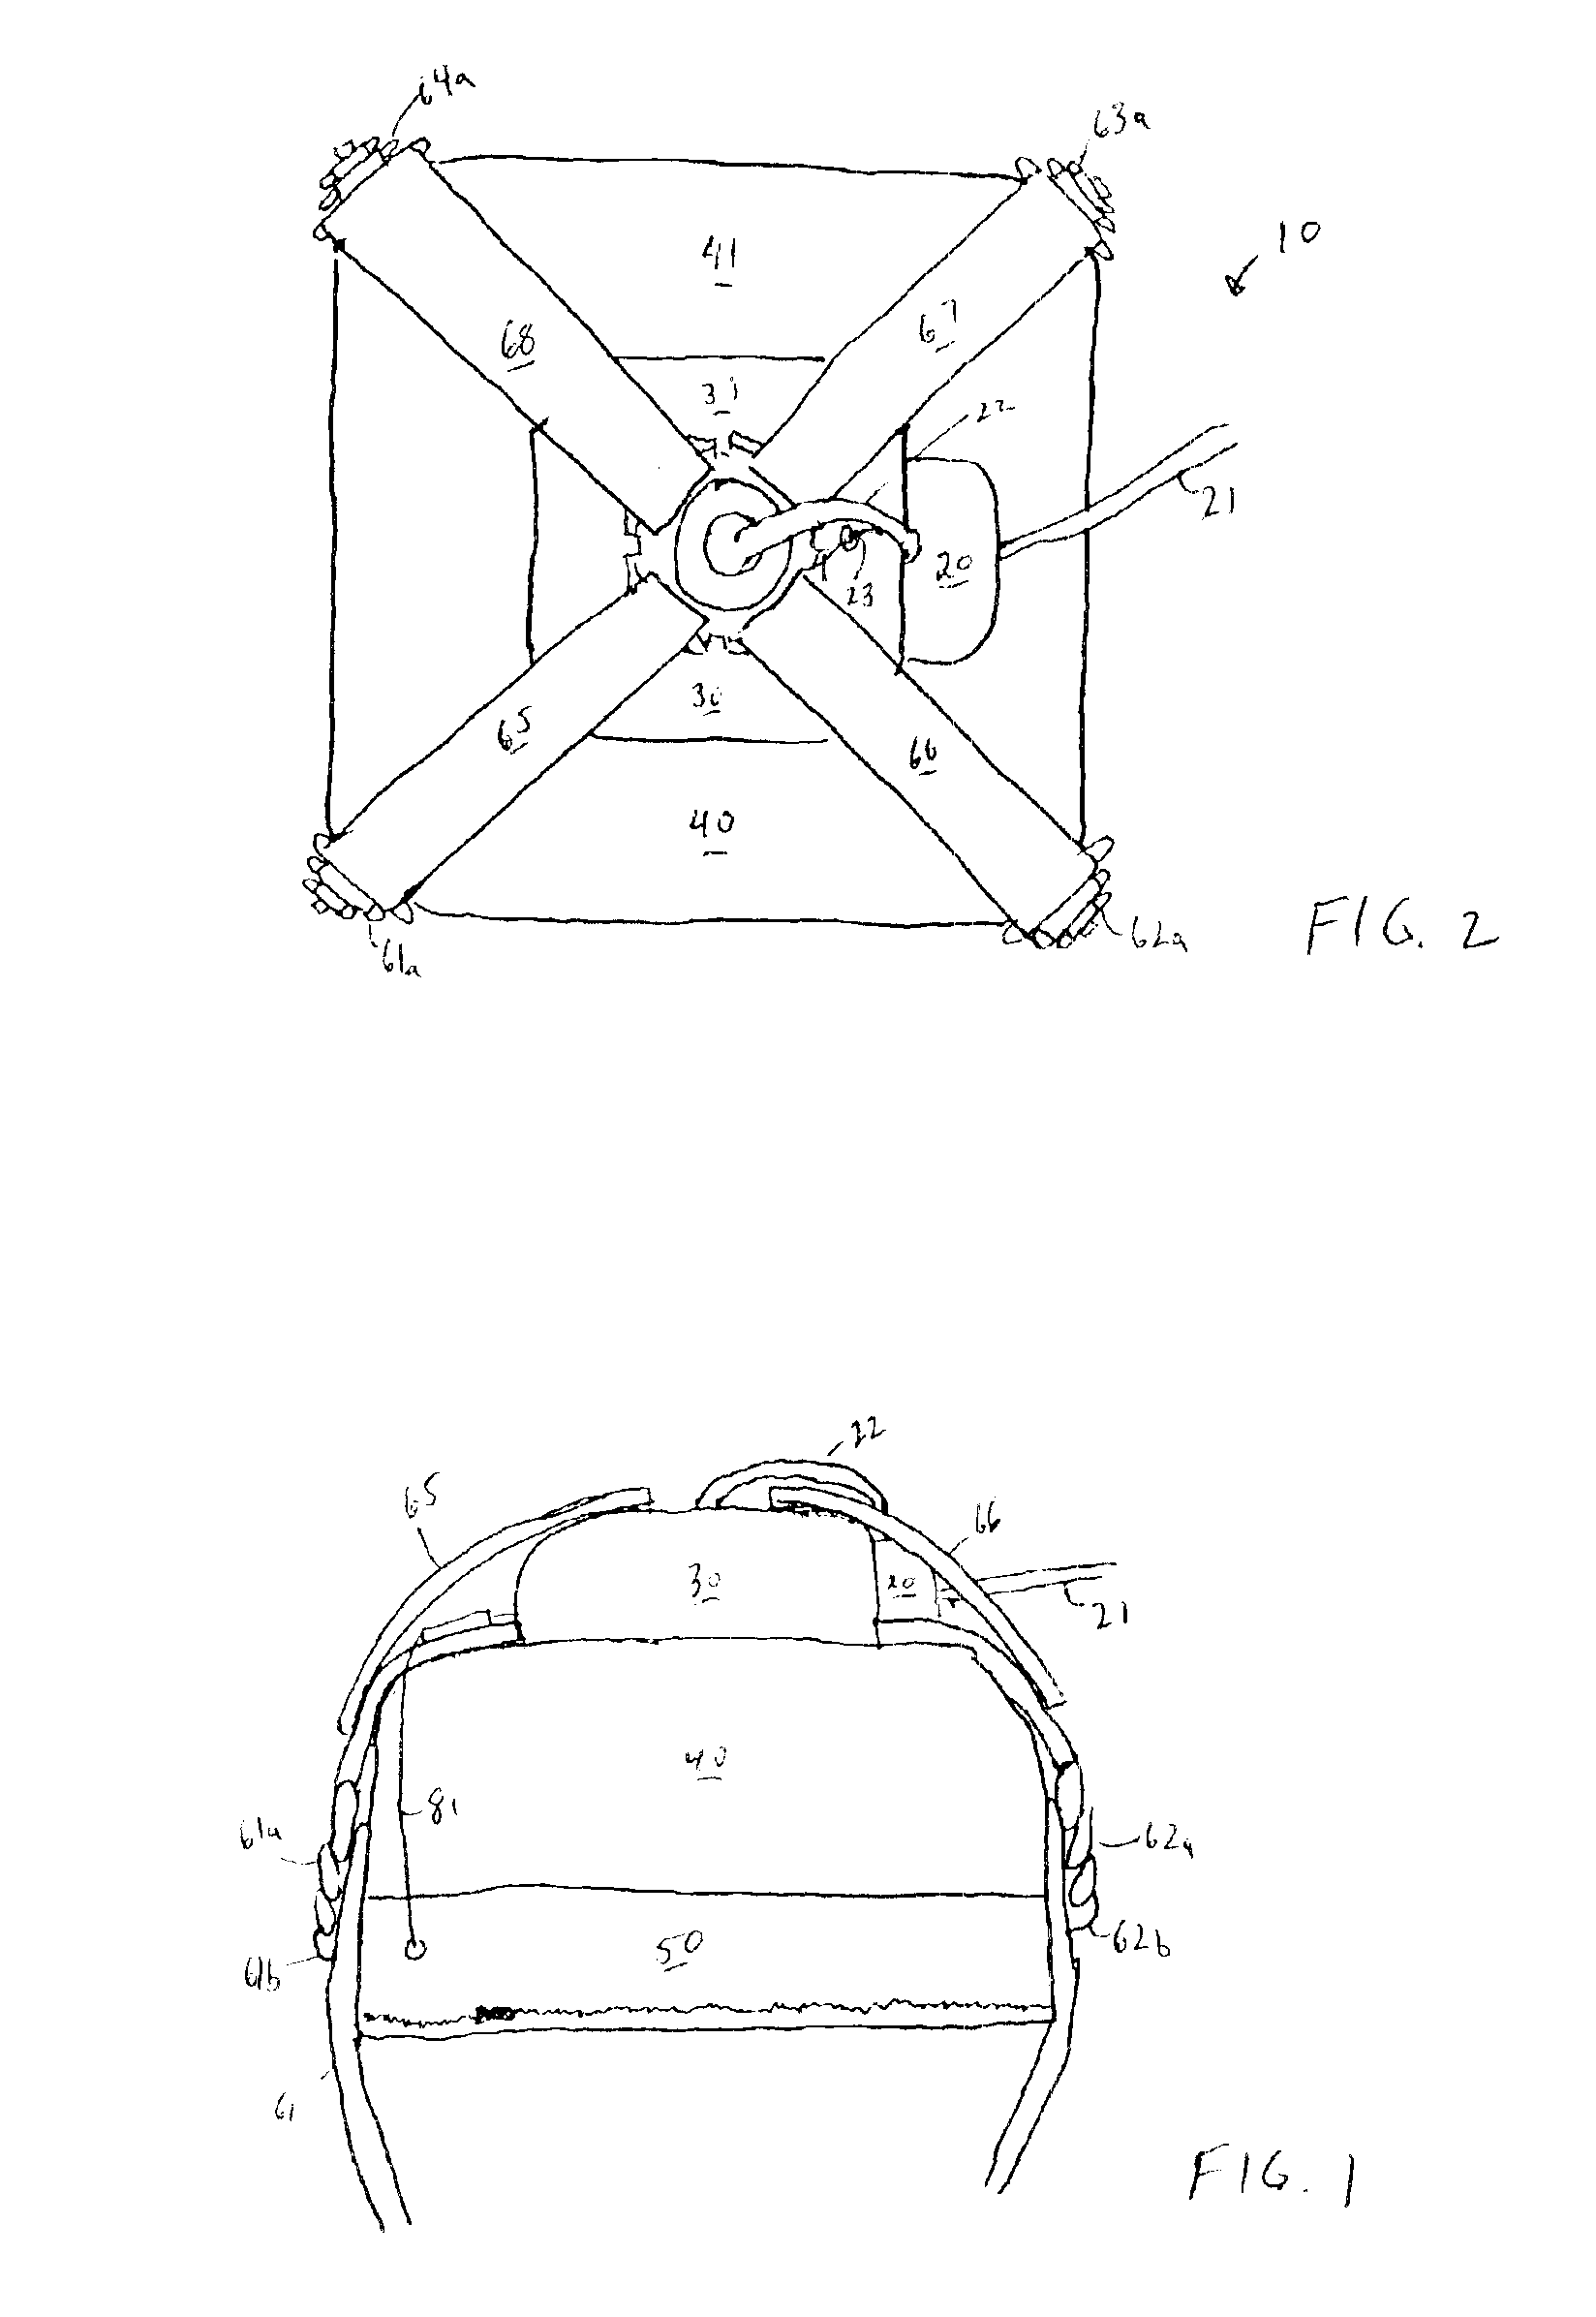 Steerable parachute control system and method